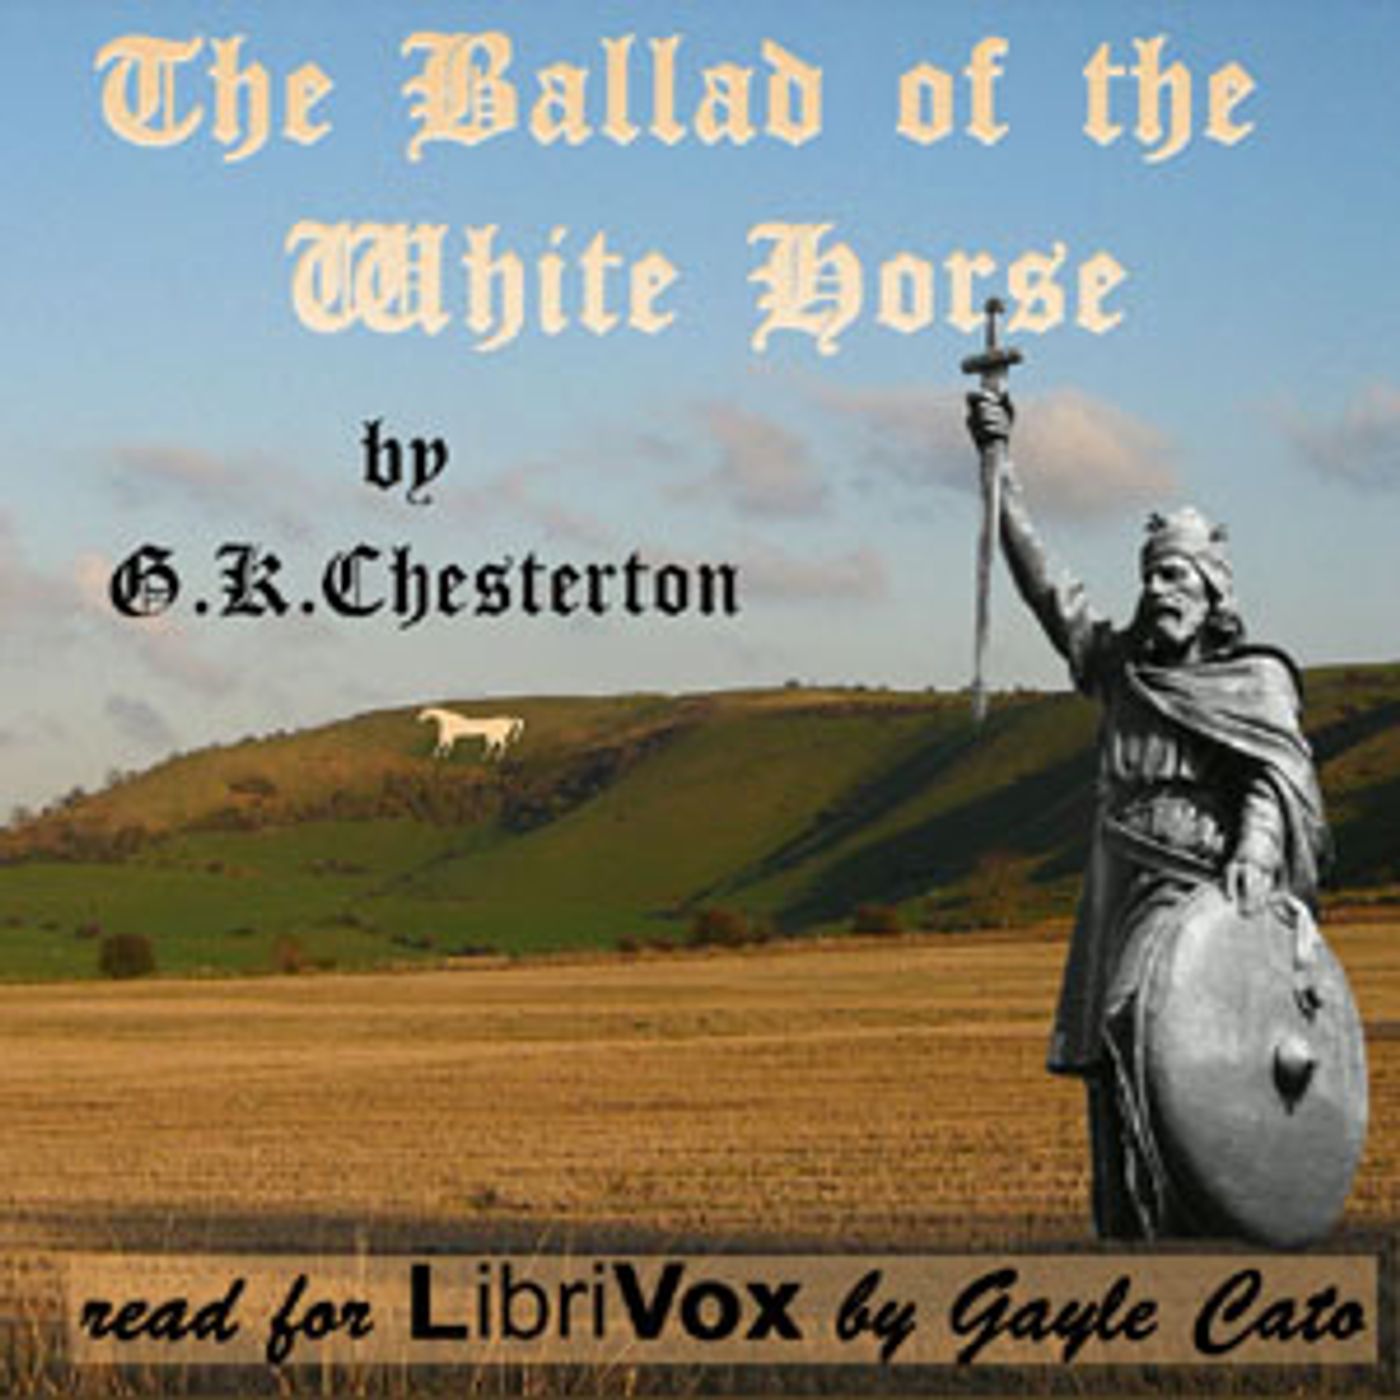 Ballad of the White Horse (Version 2), The by G. K. Chesterton (1874 – 1936)